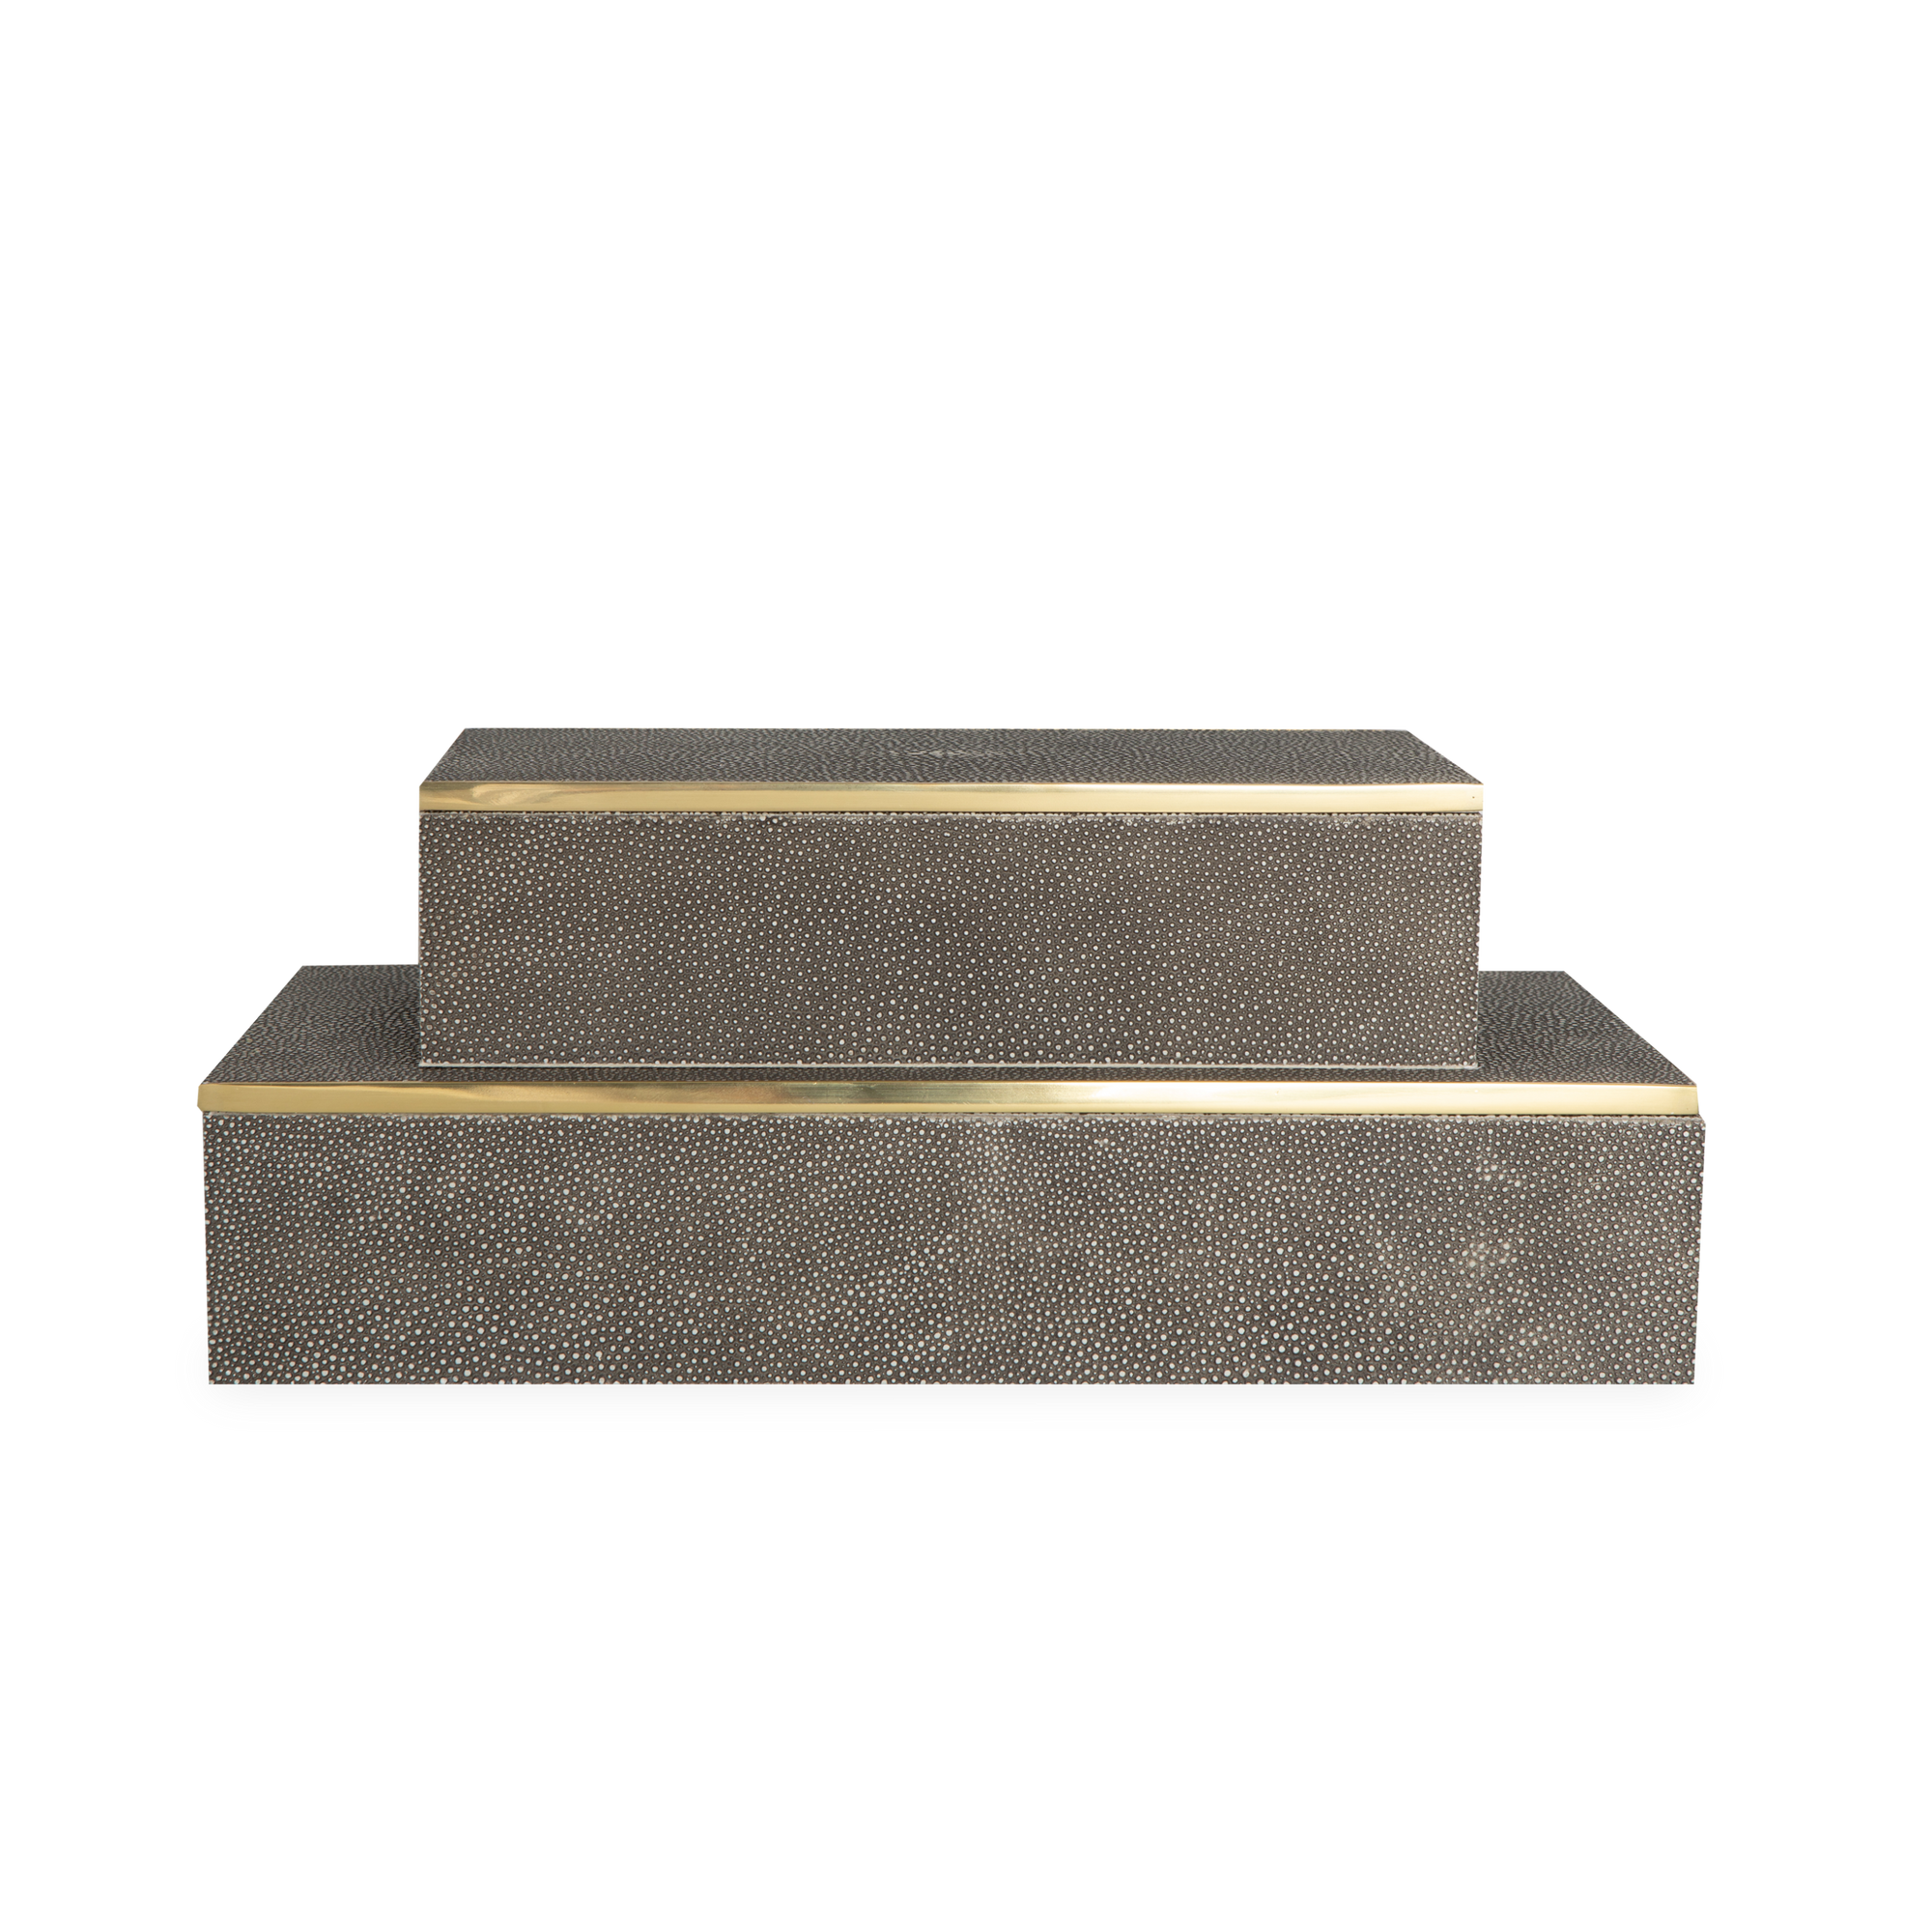 Stay organized with this  box wrapped in luxurious shagreen with brass accents and velvet backing.